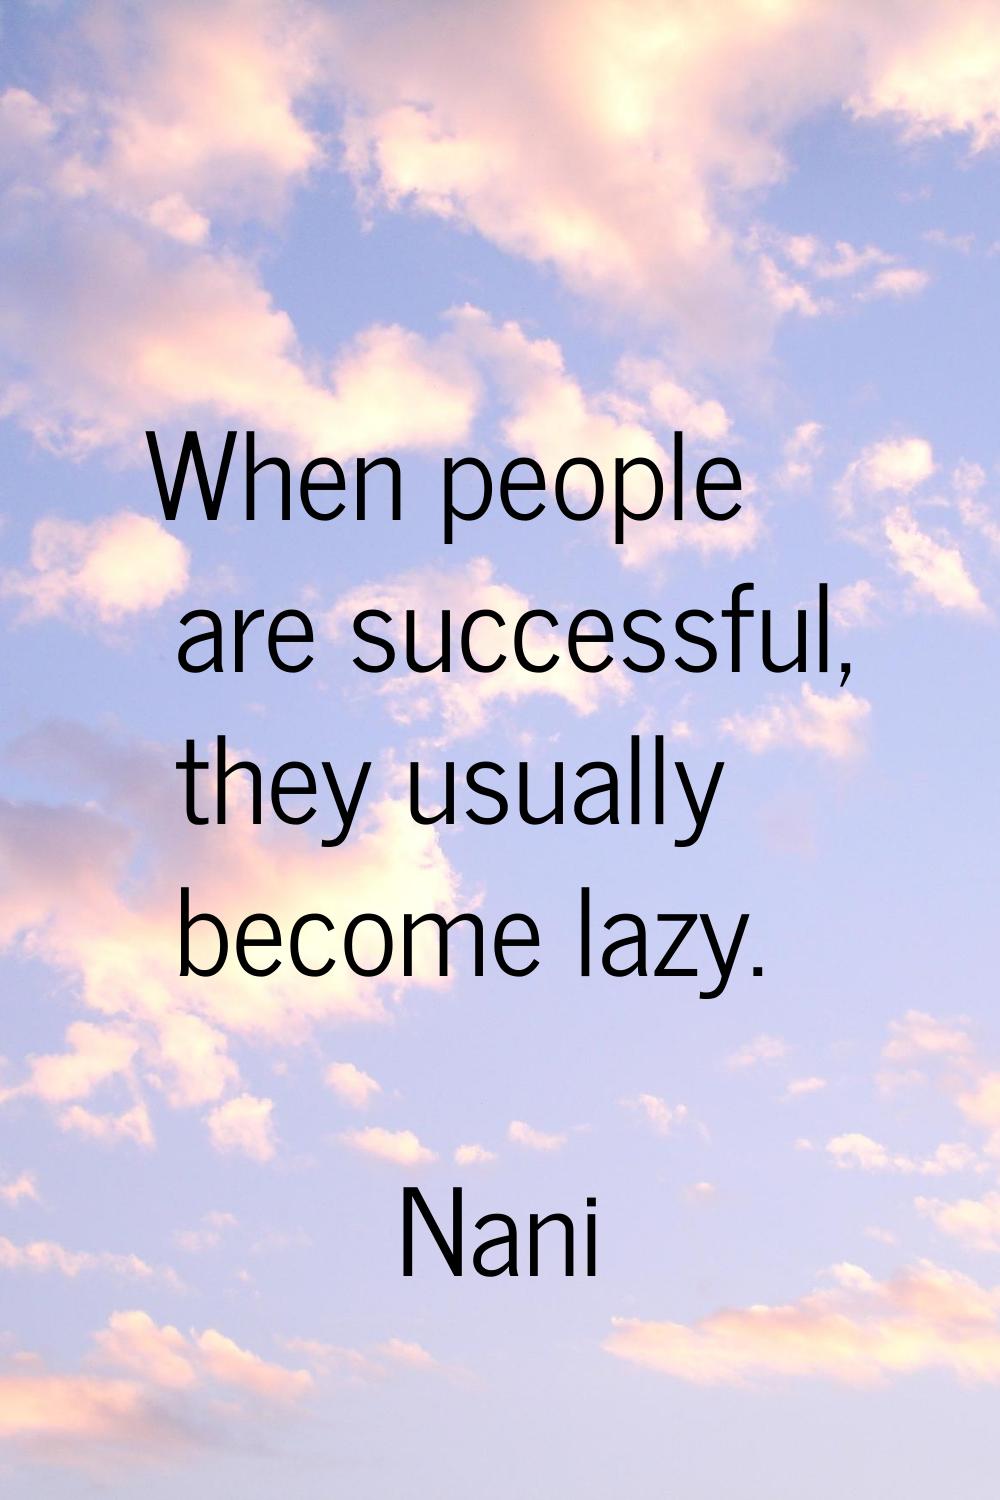 When people are successful, they usually become lazy.